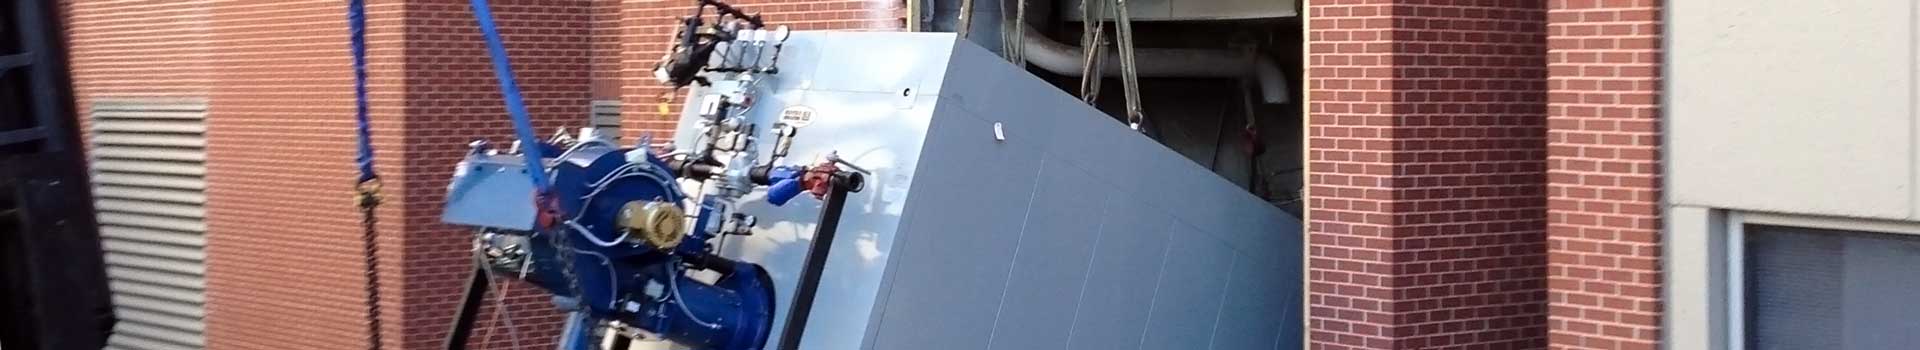 Boiler Installation at University of Tennessee Health Science Center